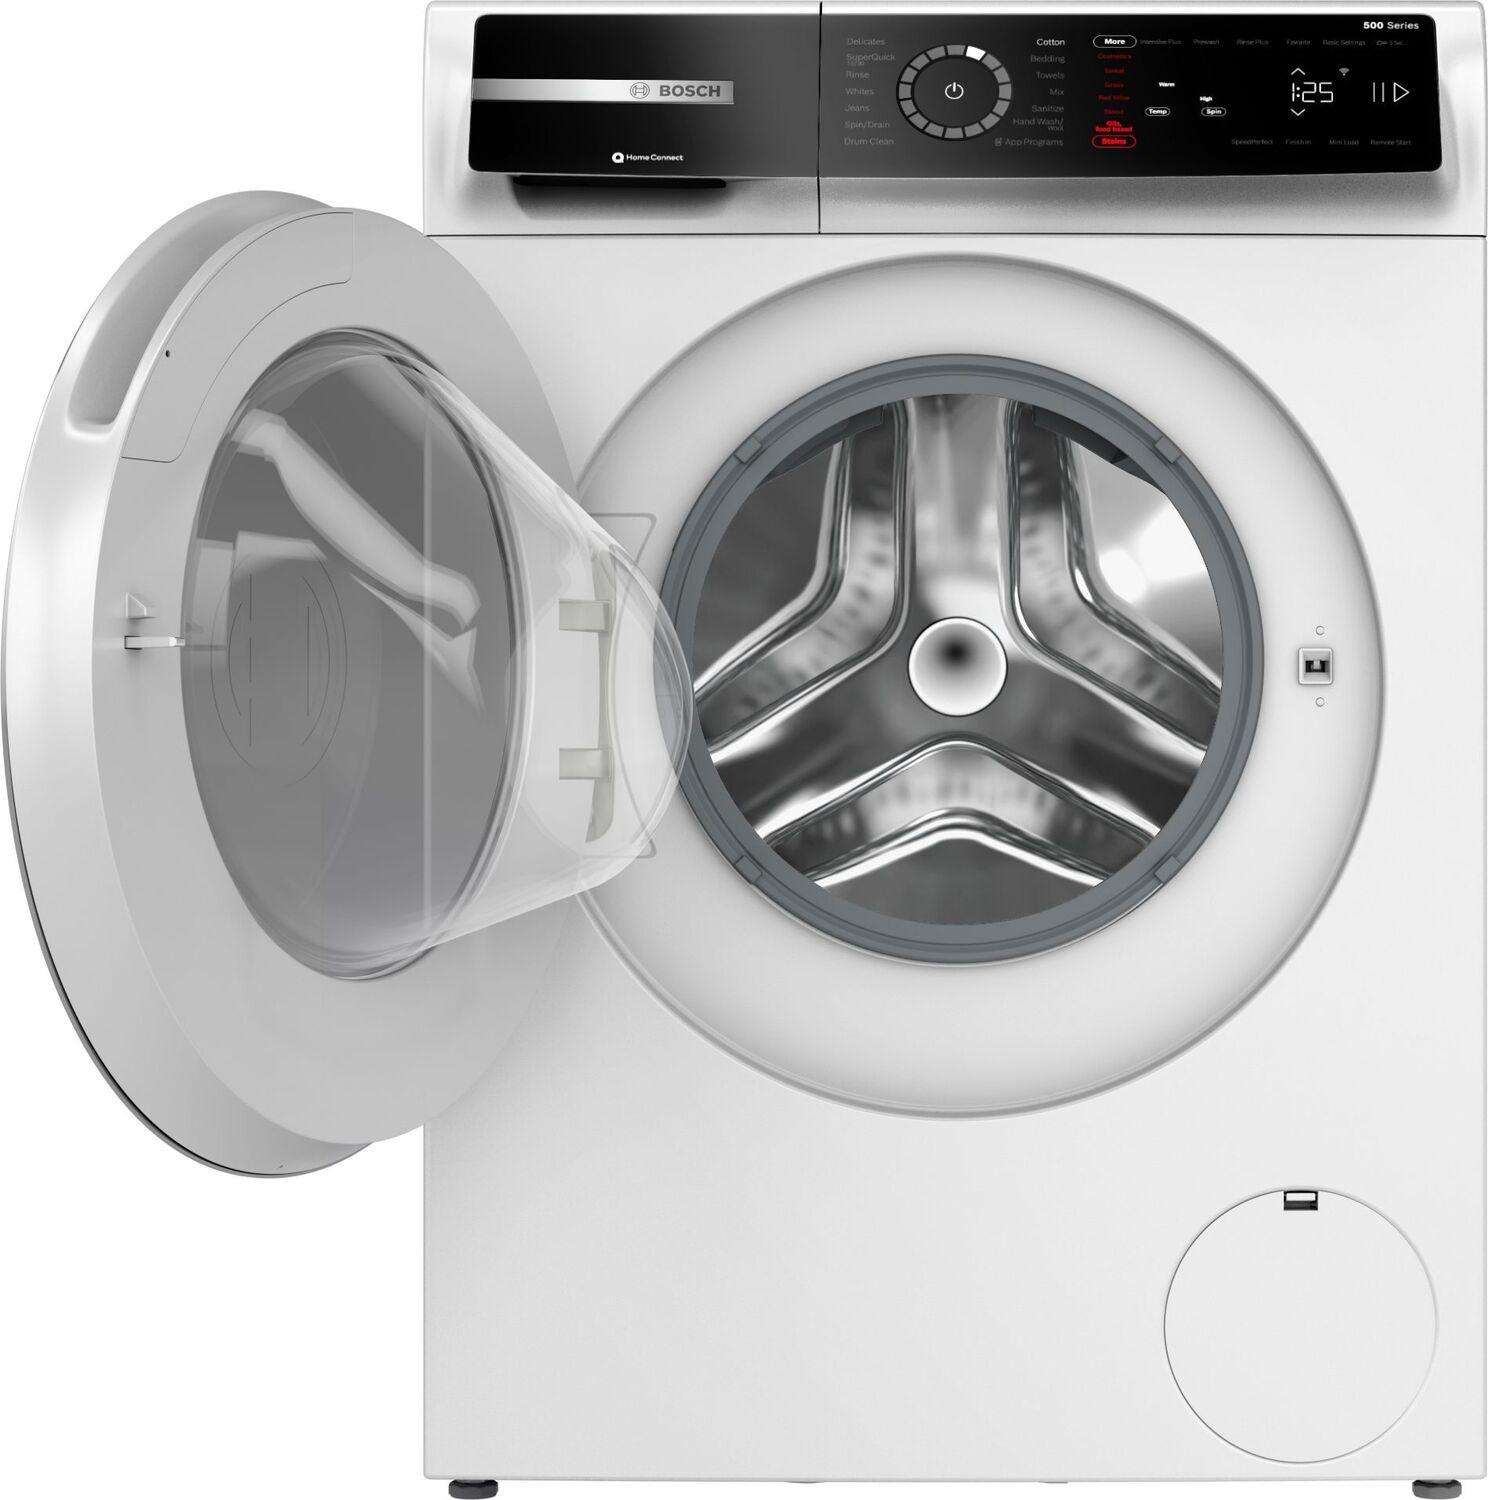 Bosch 500 Series Compact Washer 1600 rpm WGB24600UC